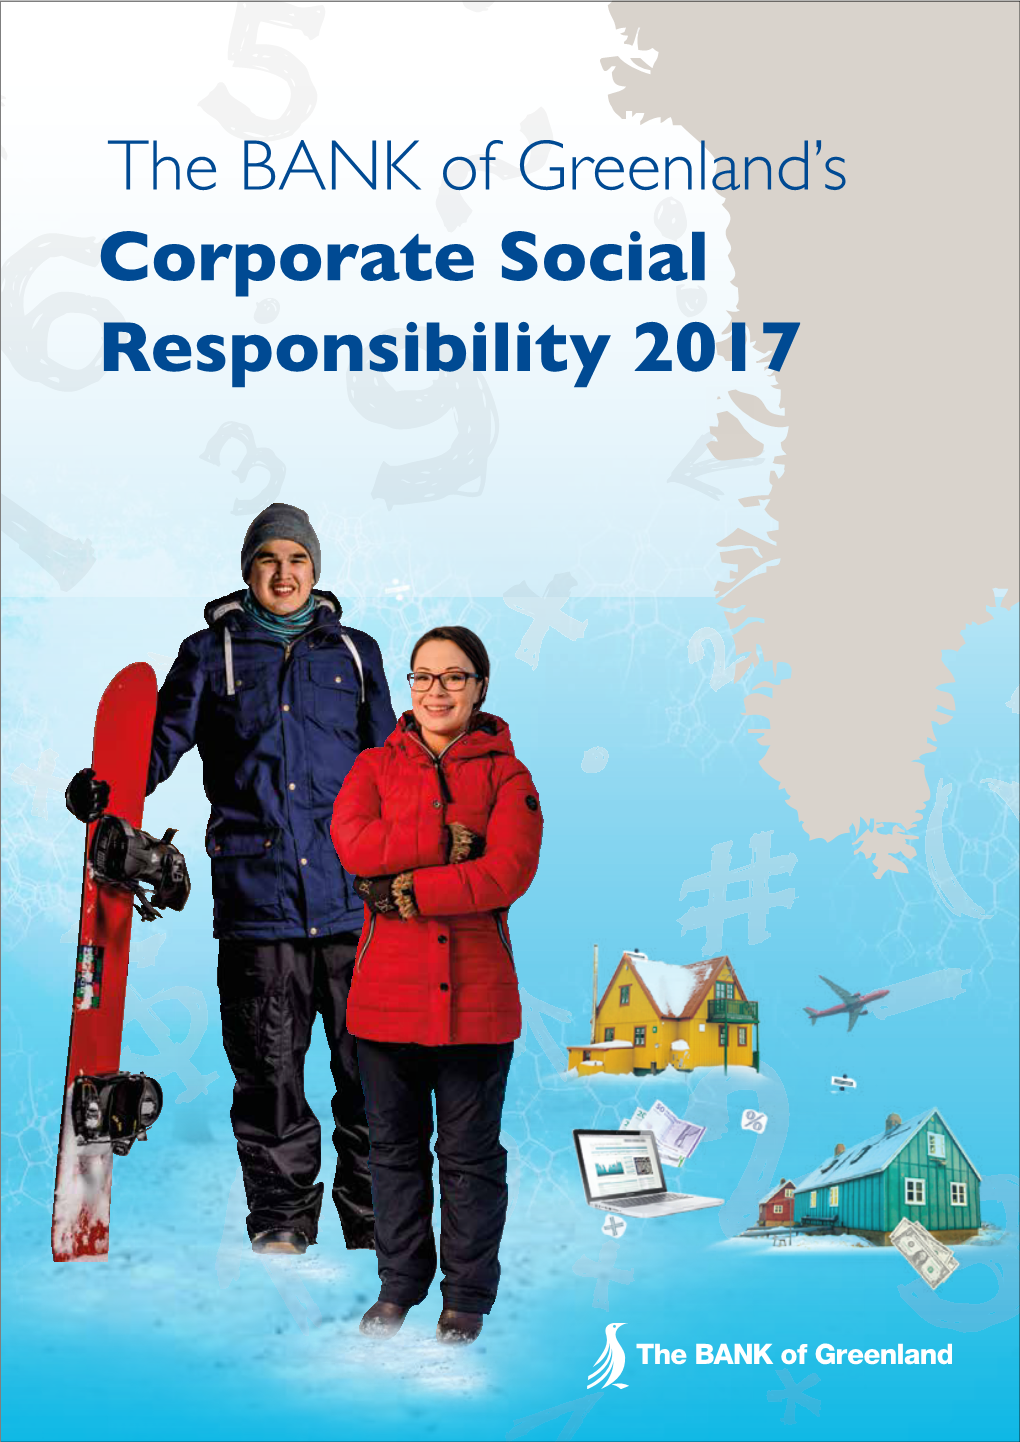 Report on the BANK of Greenland's CSR in 2017